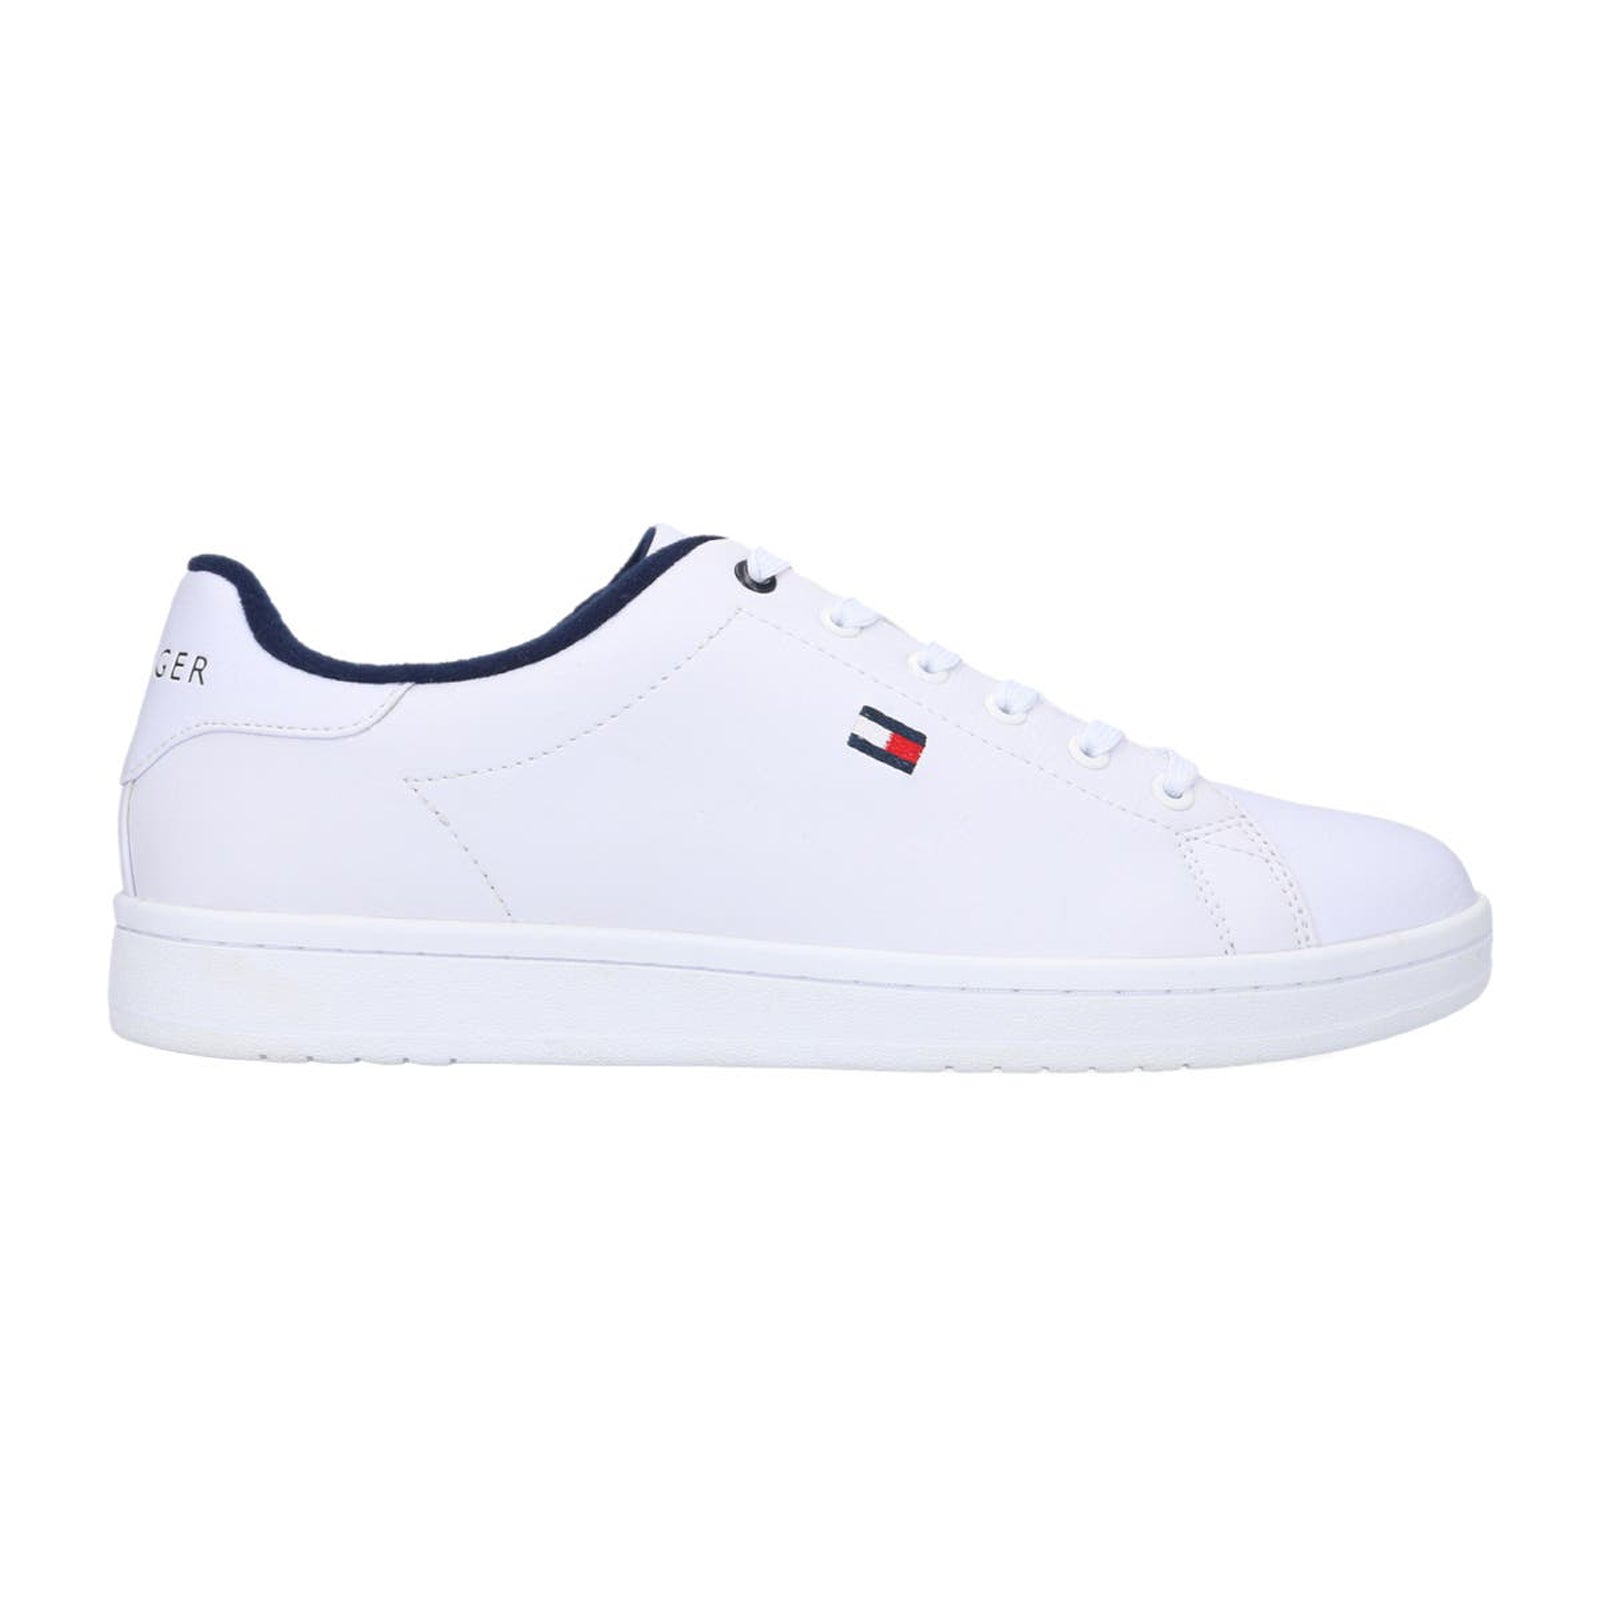 Tommy Hilfiger Shoes Sneakers Lendar Mens Casual Round Toe Brand New